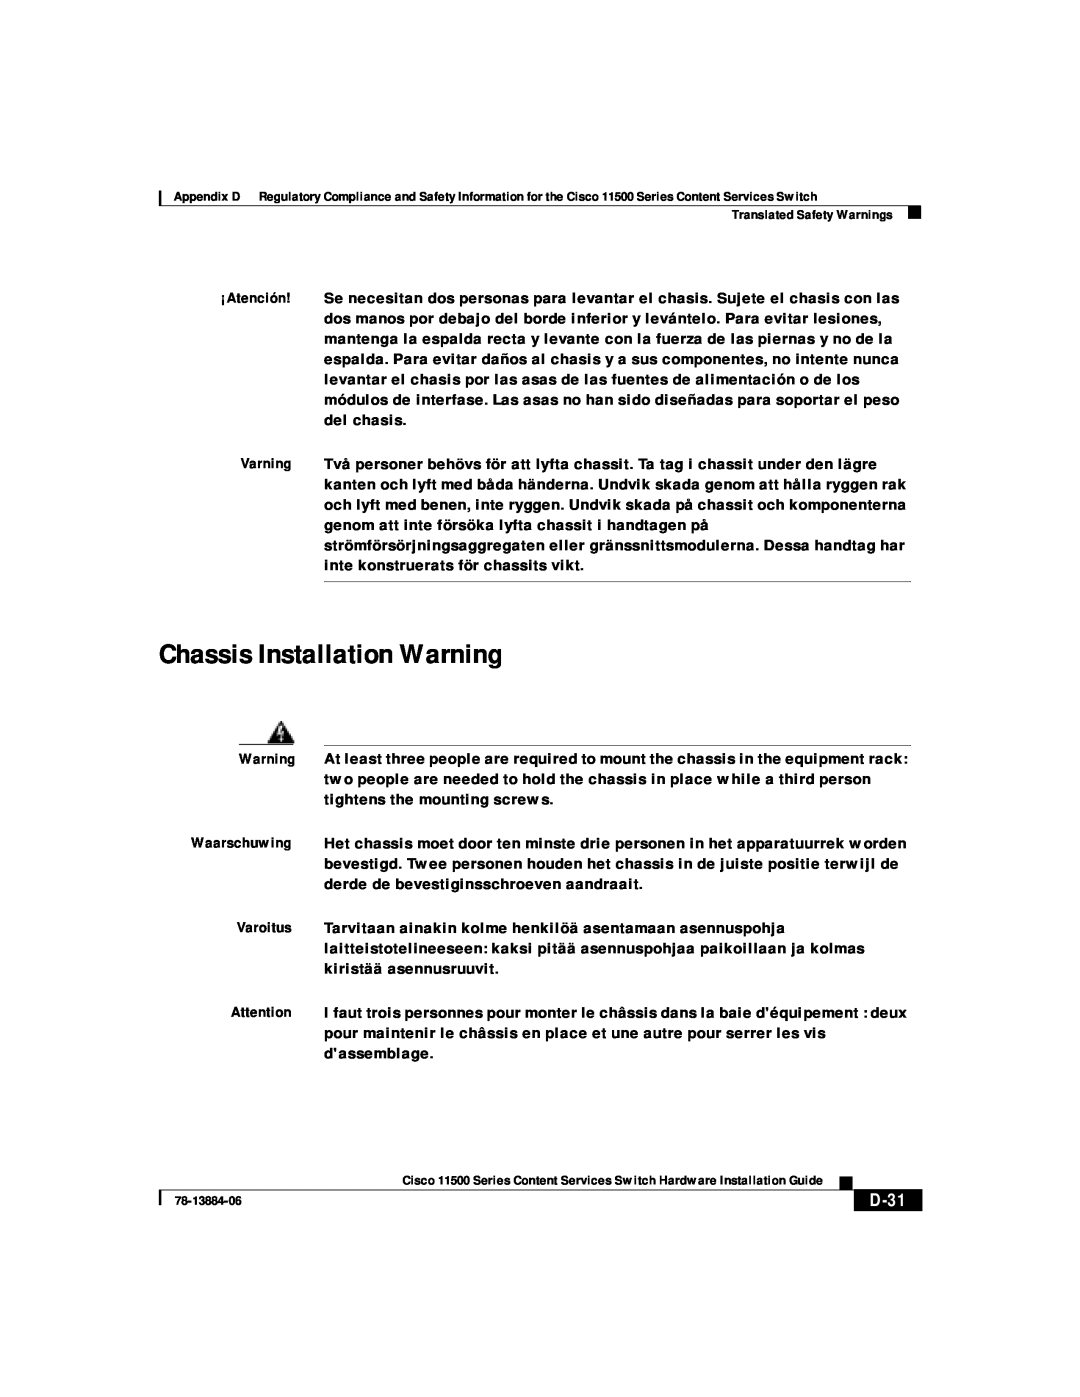 Cisco Systems 11500 Series manual Chassis Installation Warning, D-31 